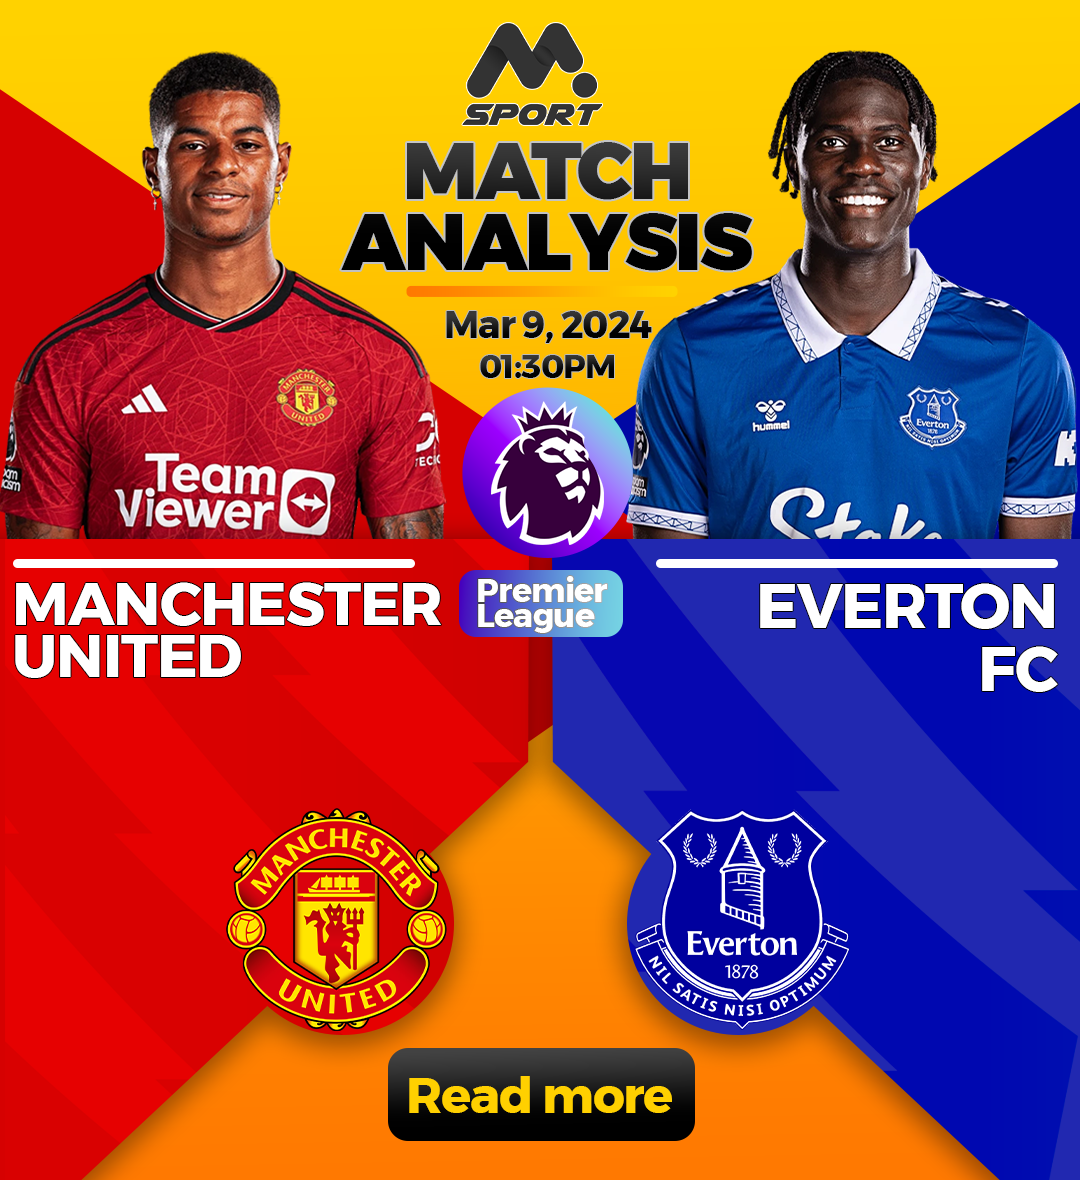 Manchester United vs. Everton - Preview, Team News, Predictions, Line-ups